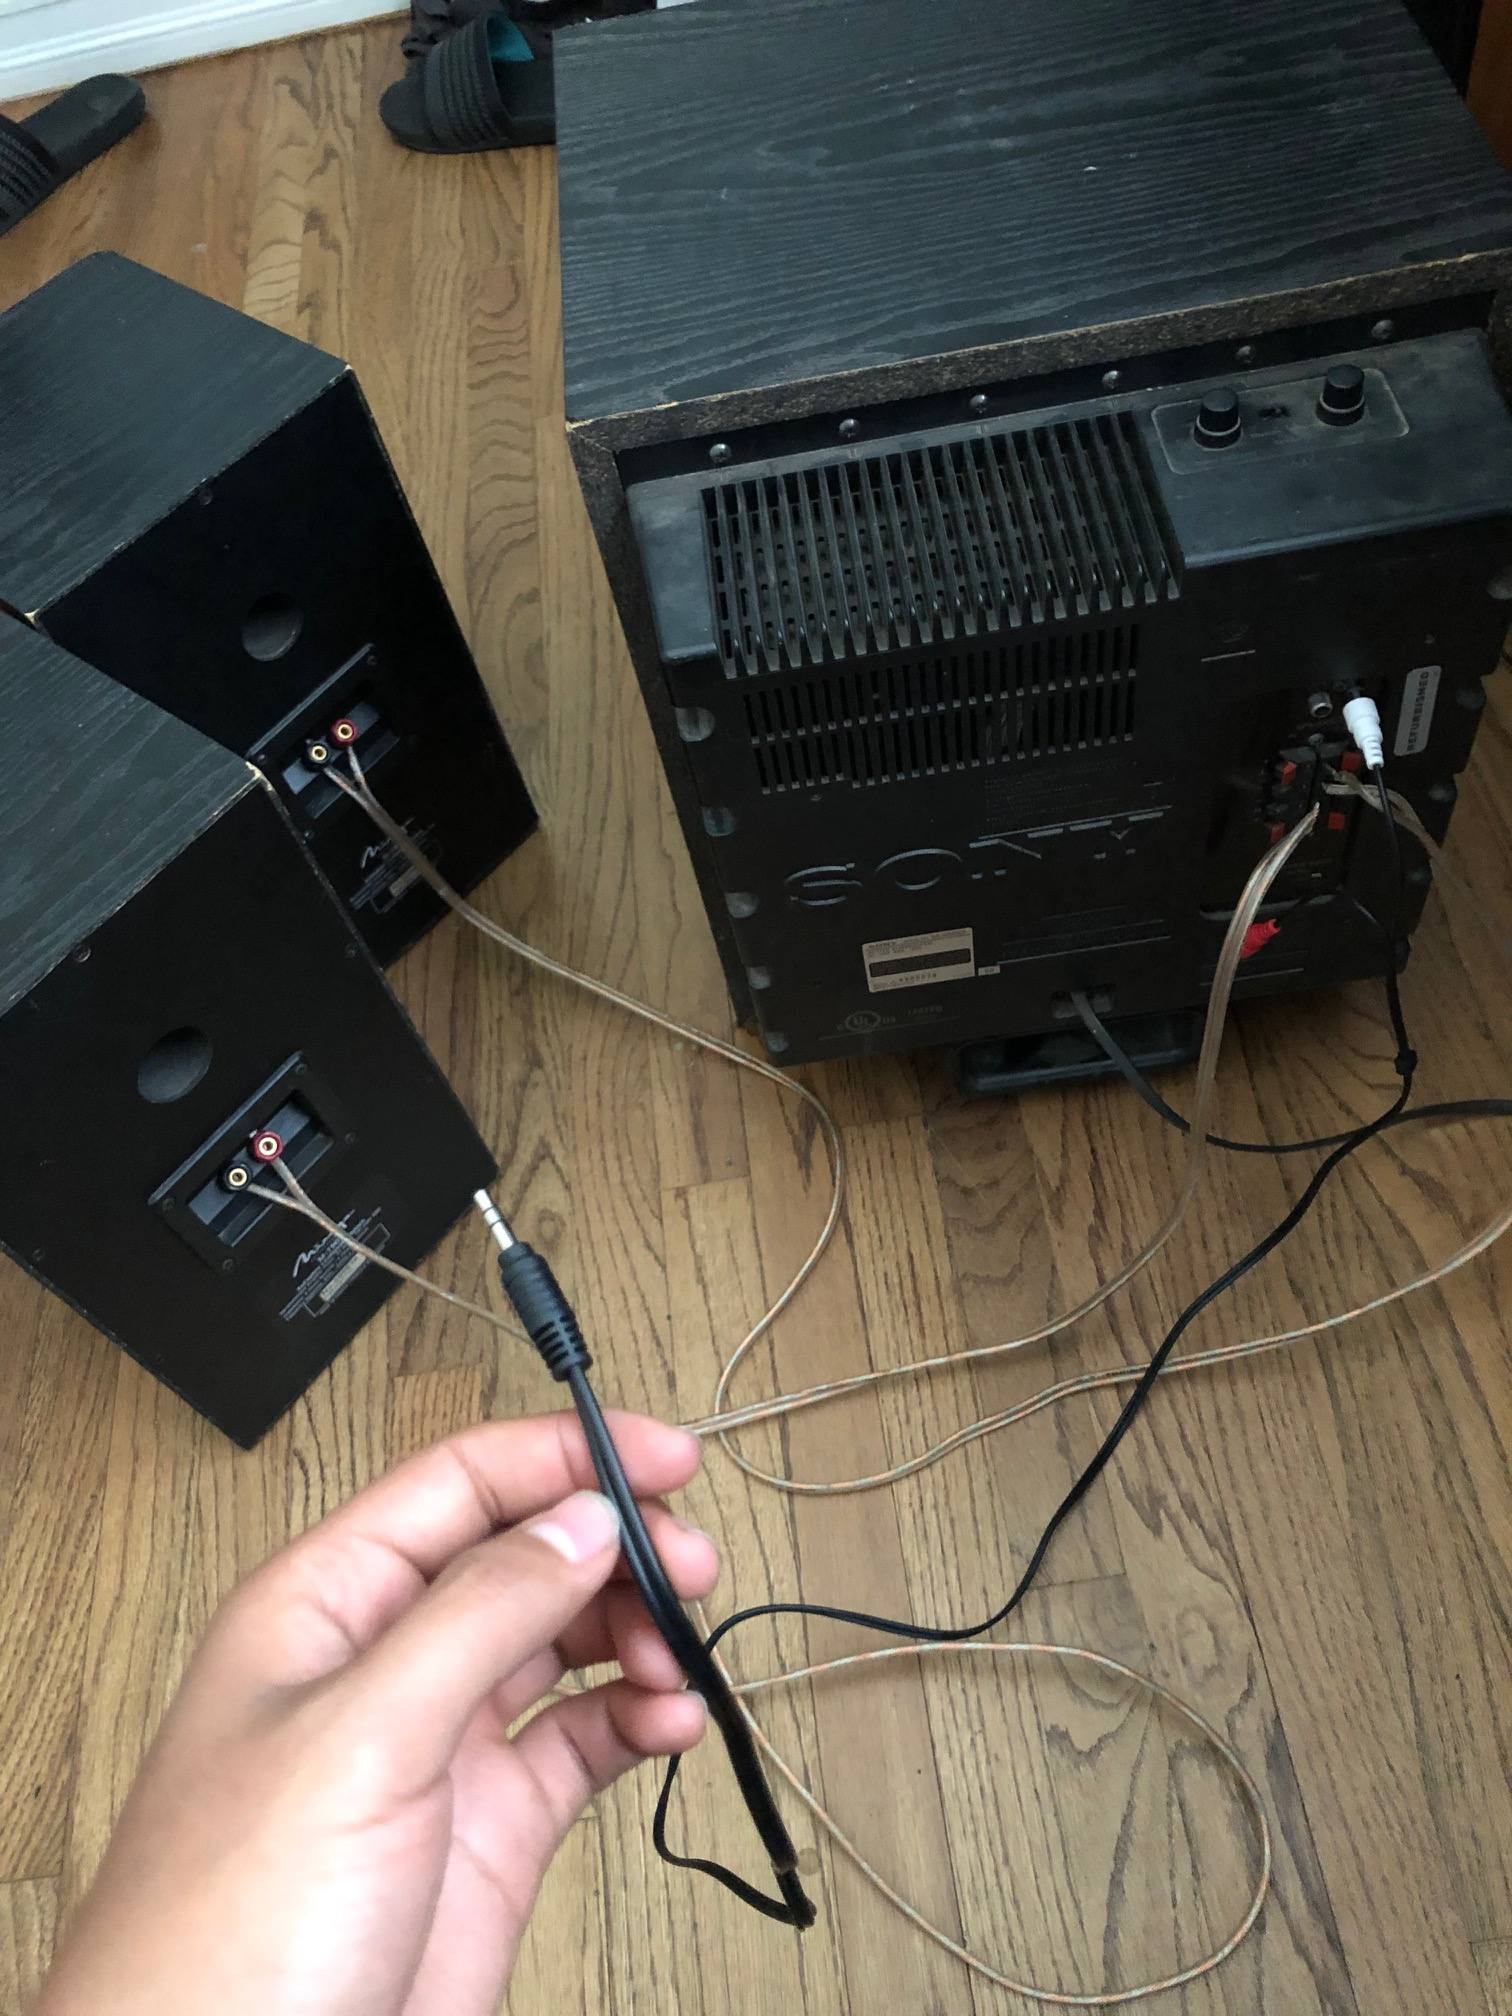 how to connect subwoofer to pc?